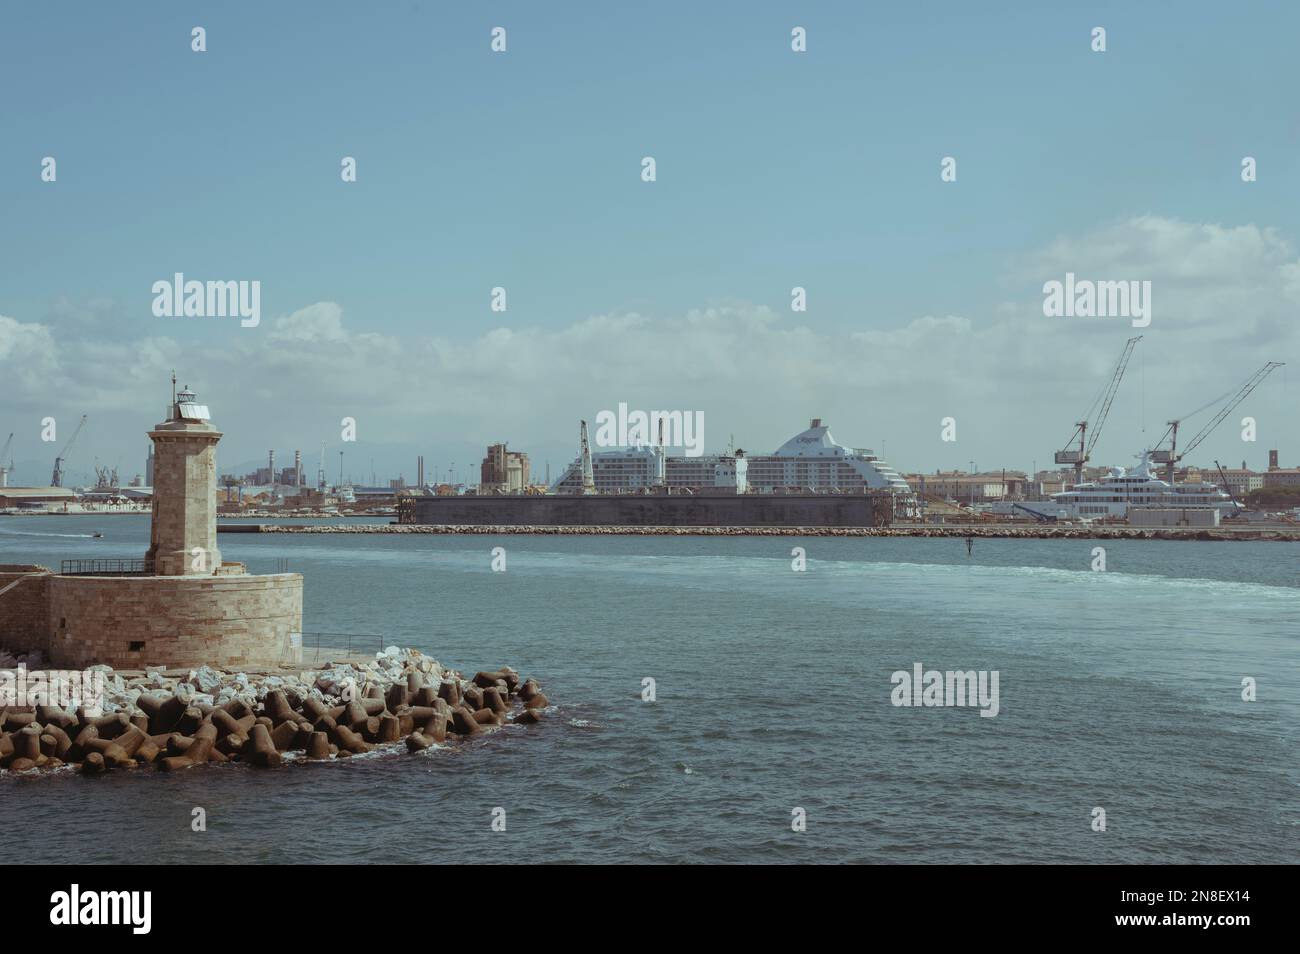 Livorno, Tuscany (Italy). Images of the port of Livorno during a working day Stock Photo